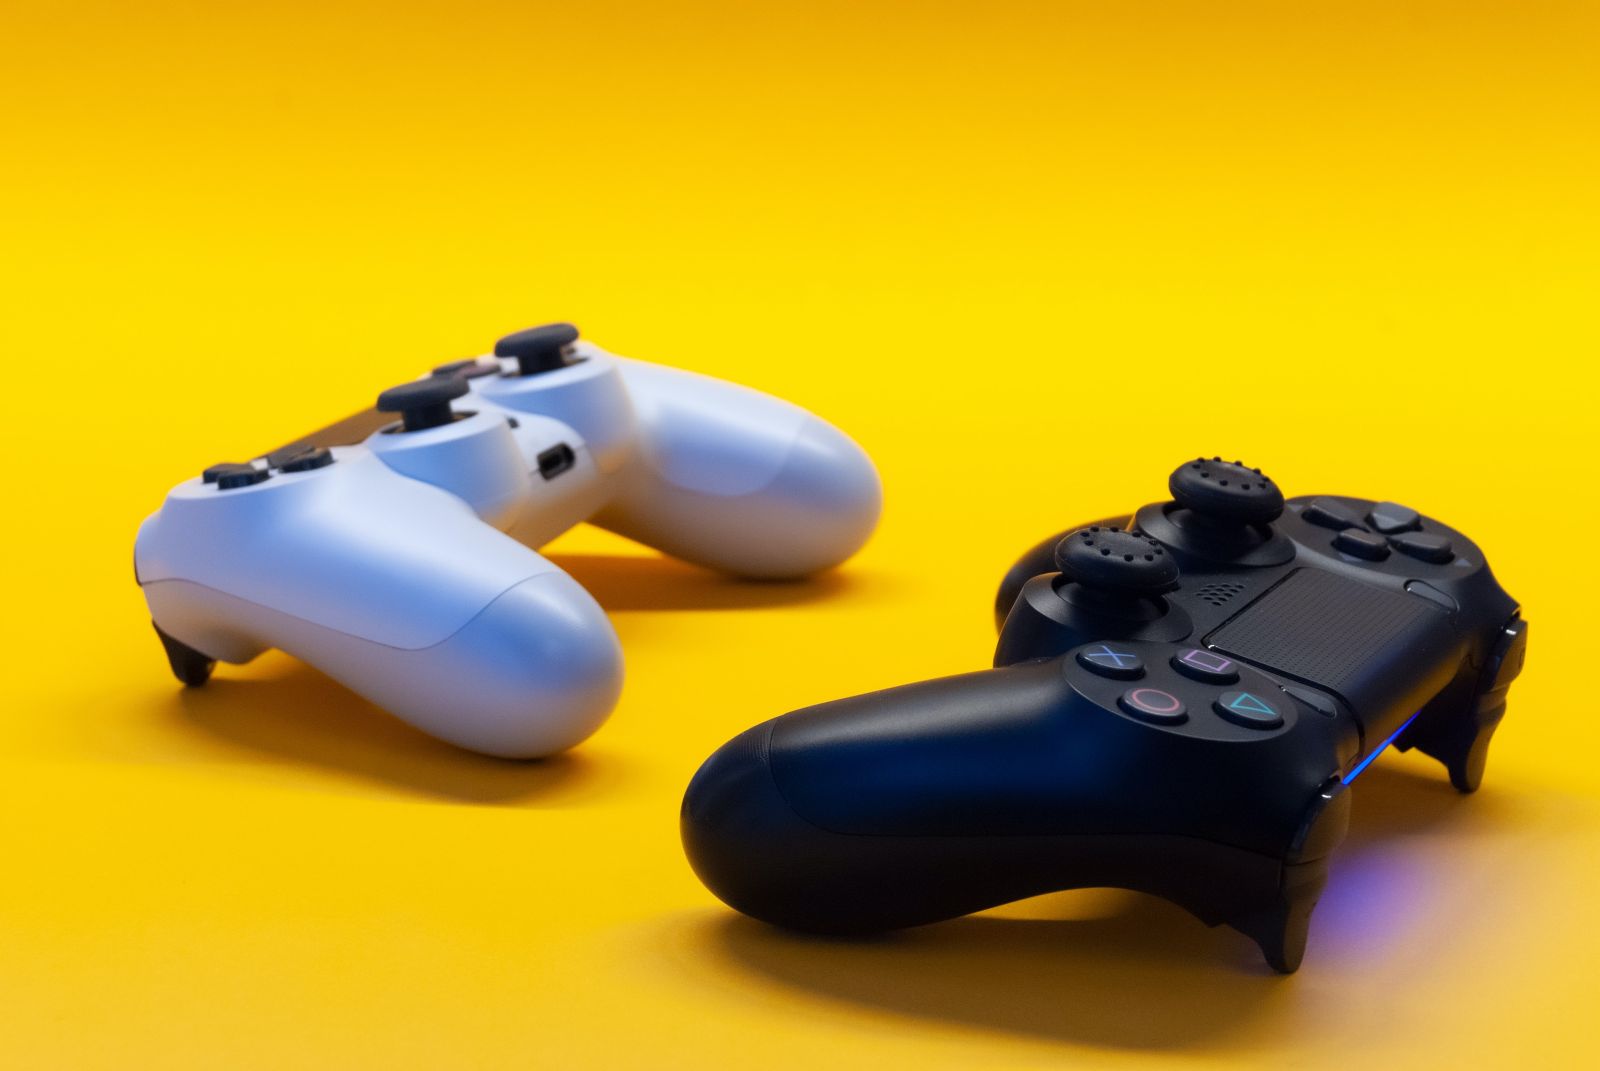 Tech (Ecommerce, Social Media, etc.) - Video Game Controllers